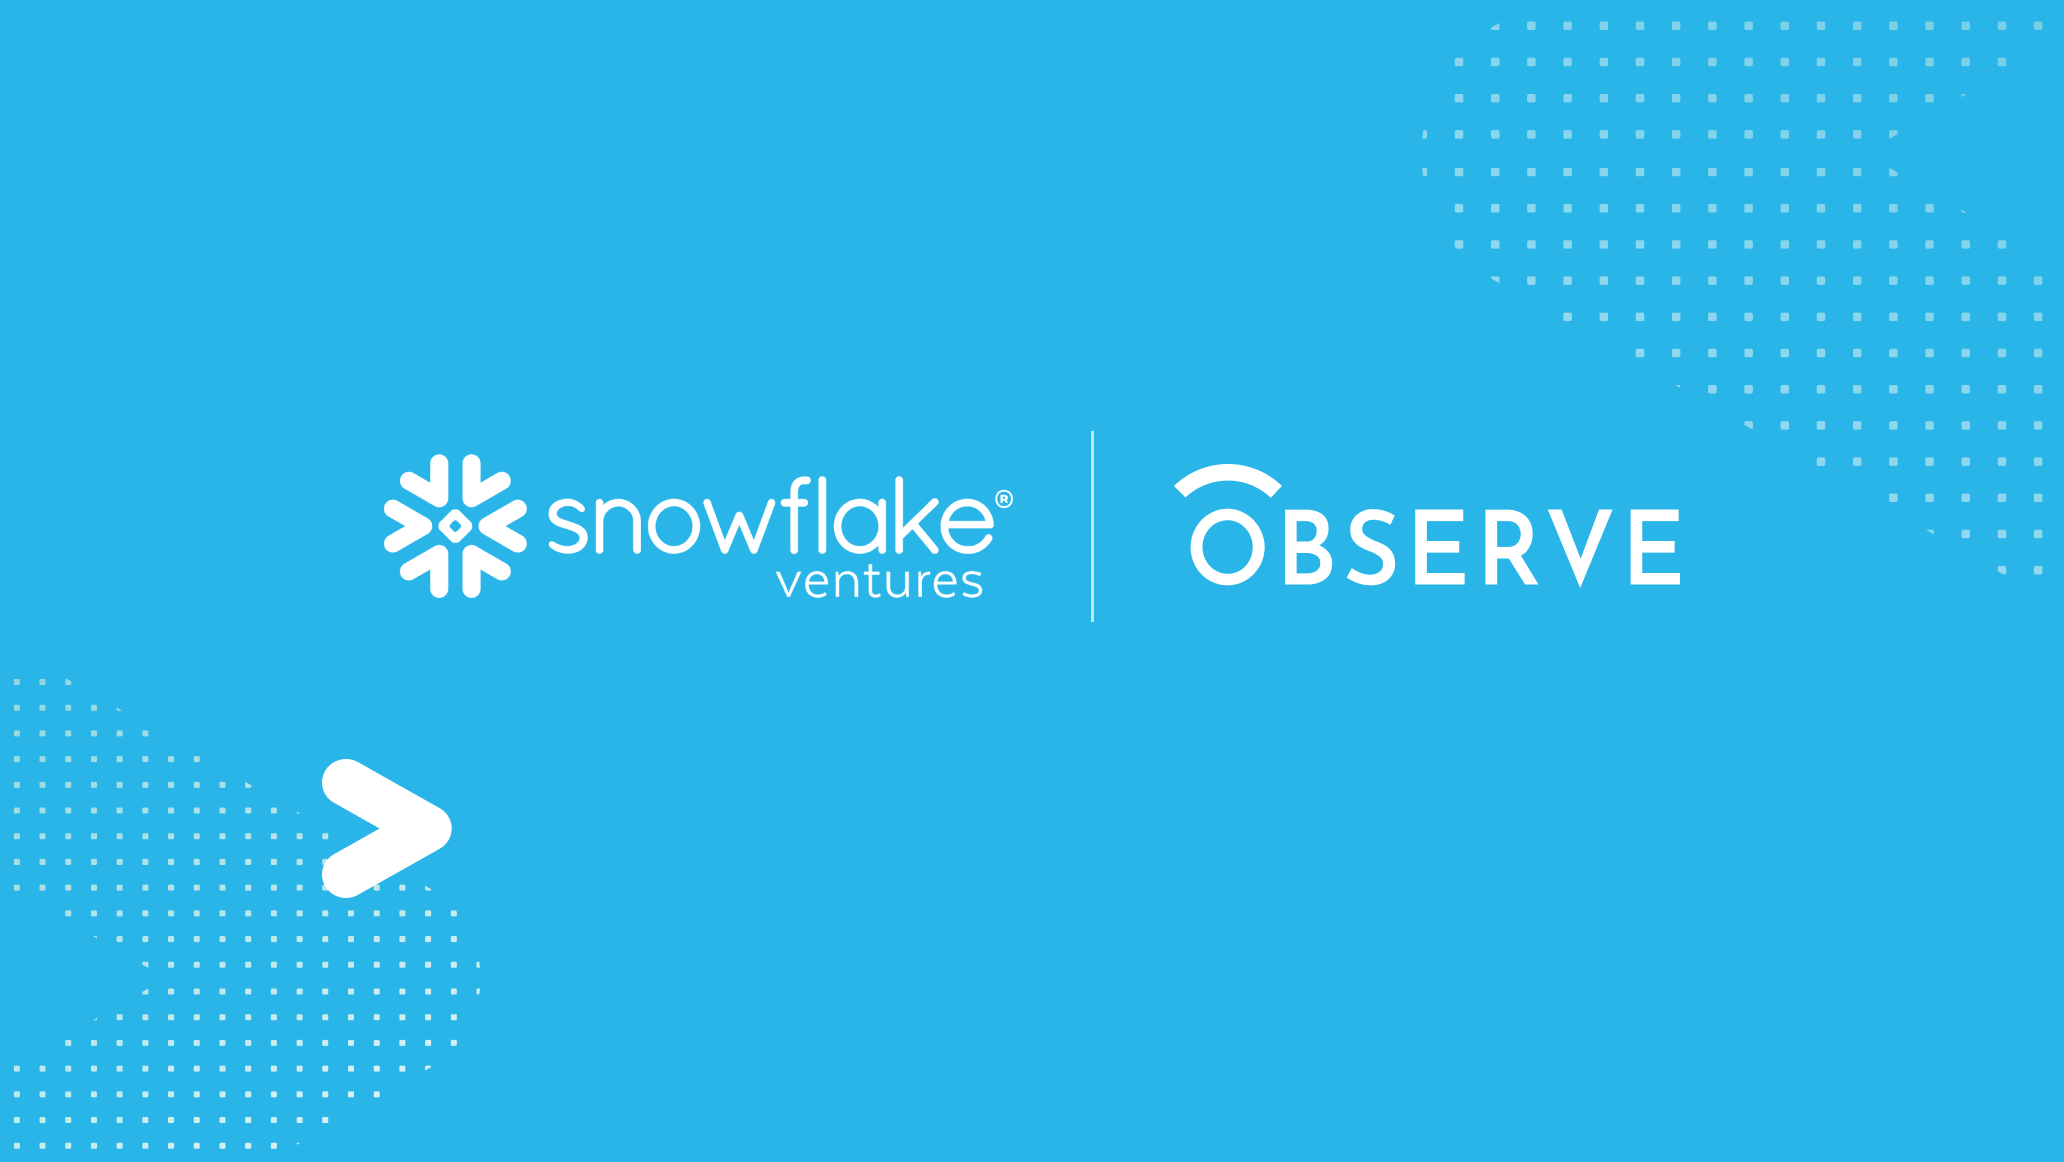 Snowflake Invests in Observe to Expand Observability in the Data Cloud